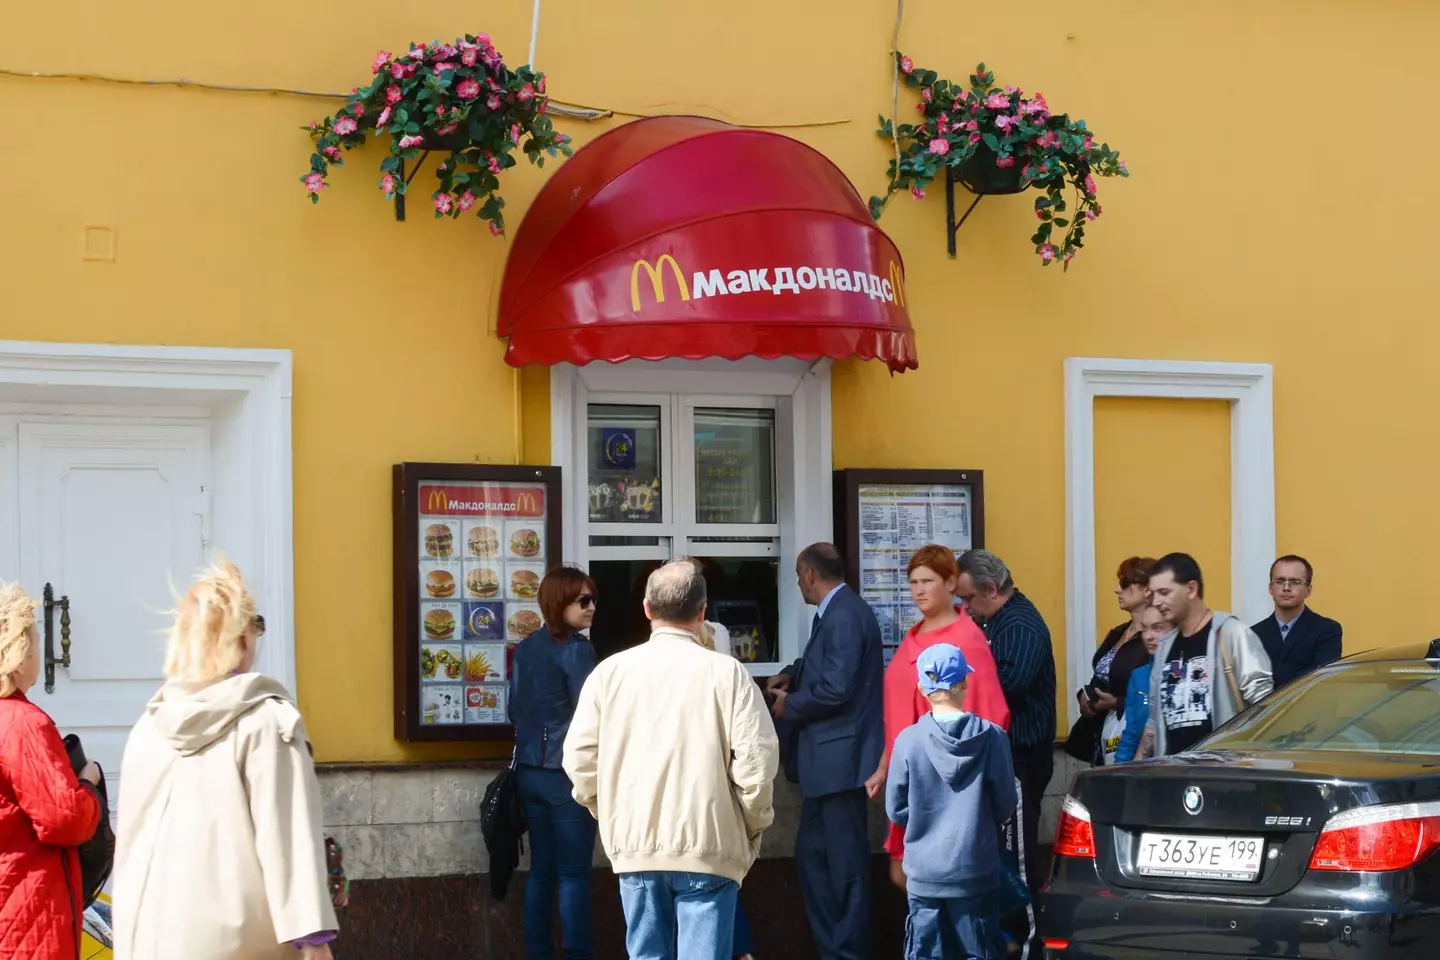 A list of new names that could replace McDonald’s in Russia has been revealed.